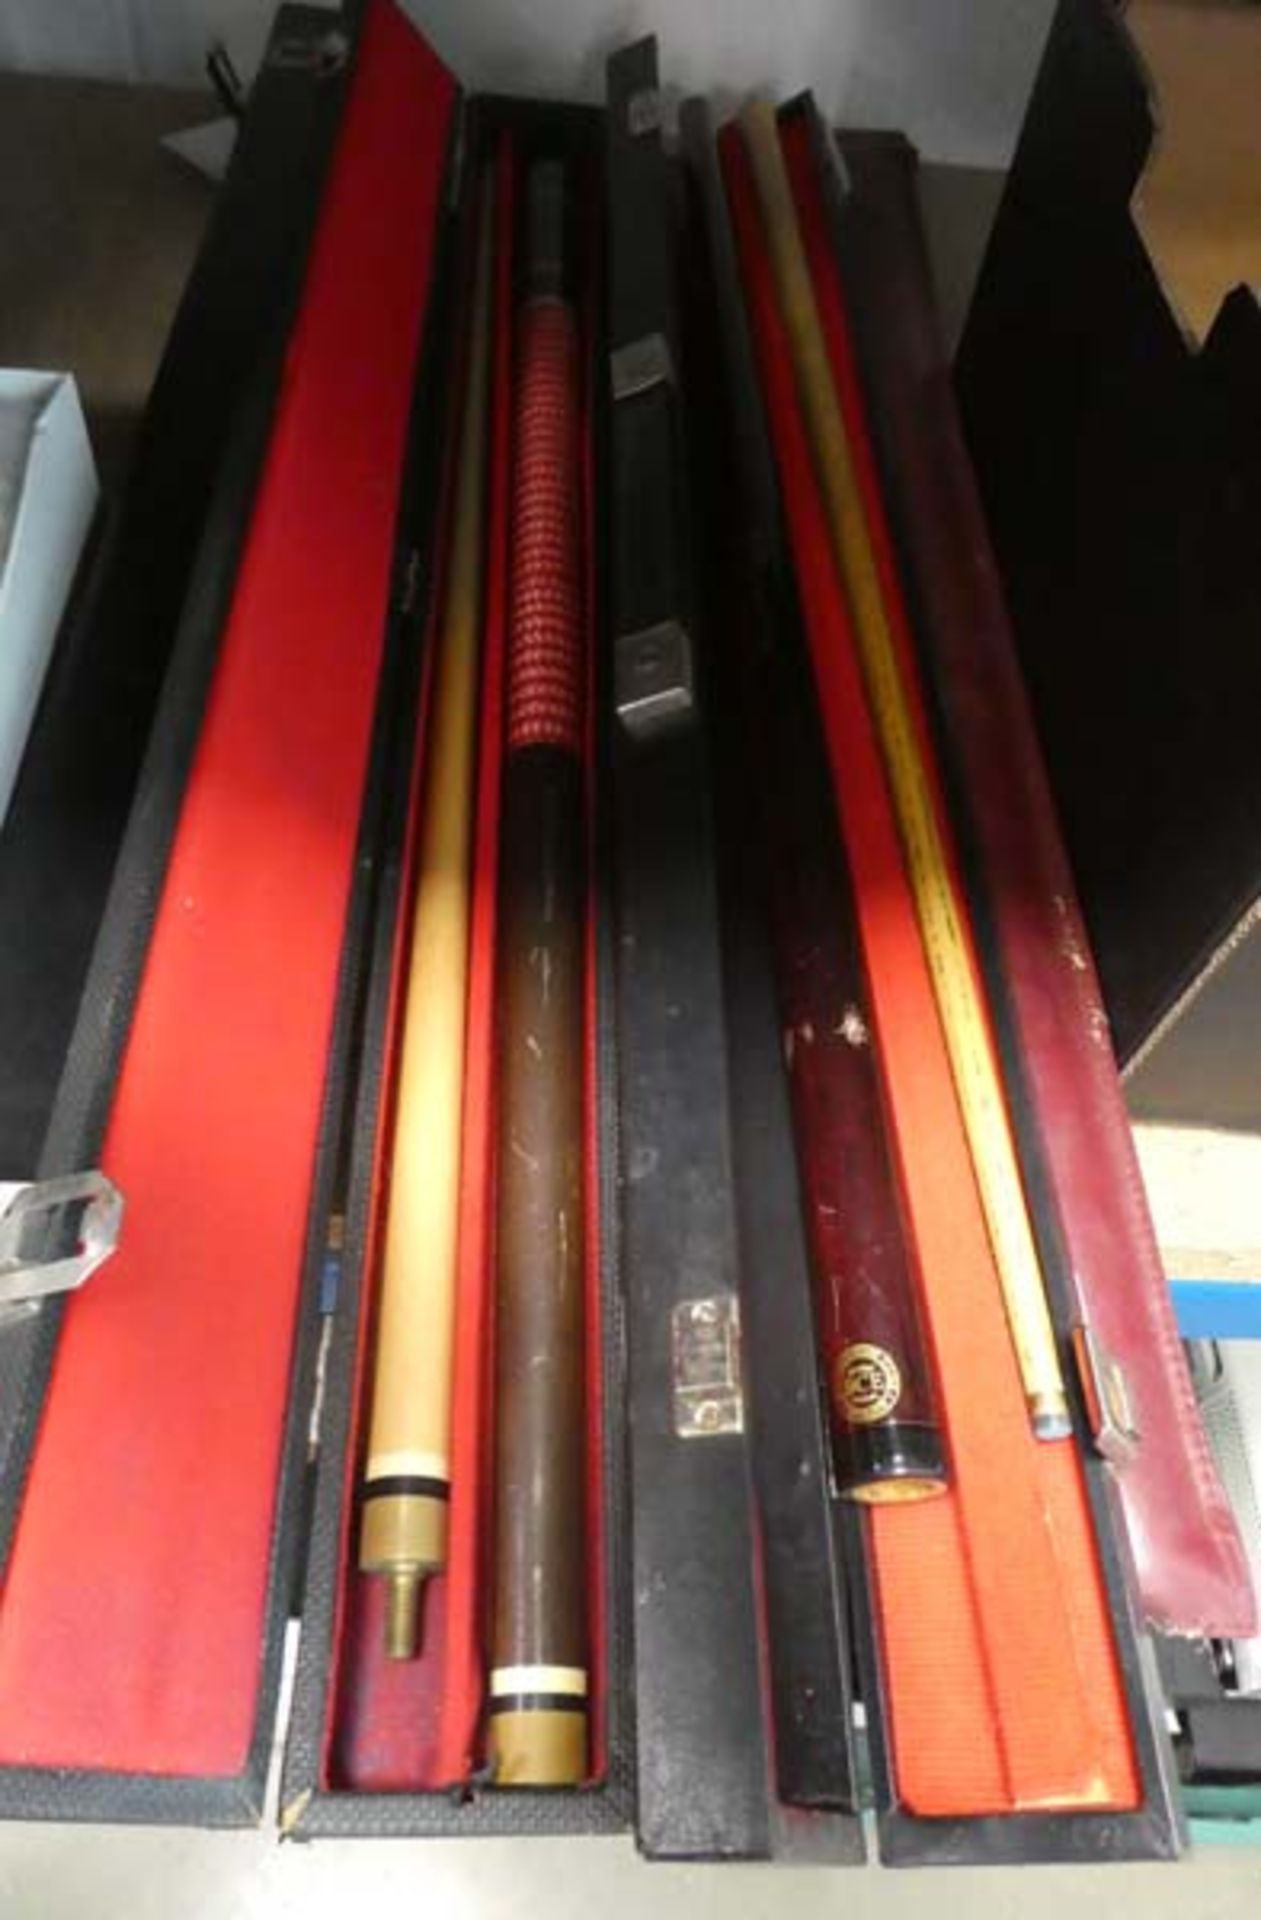 3 snooker cue sets with cases